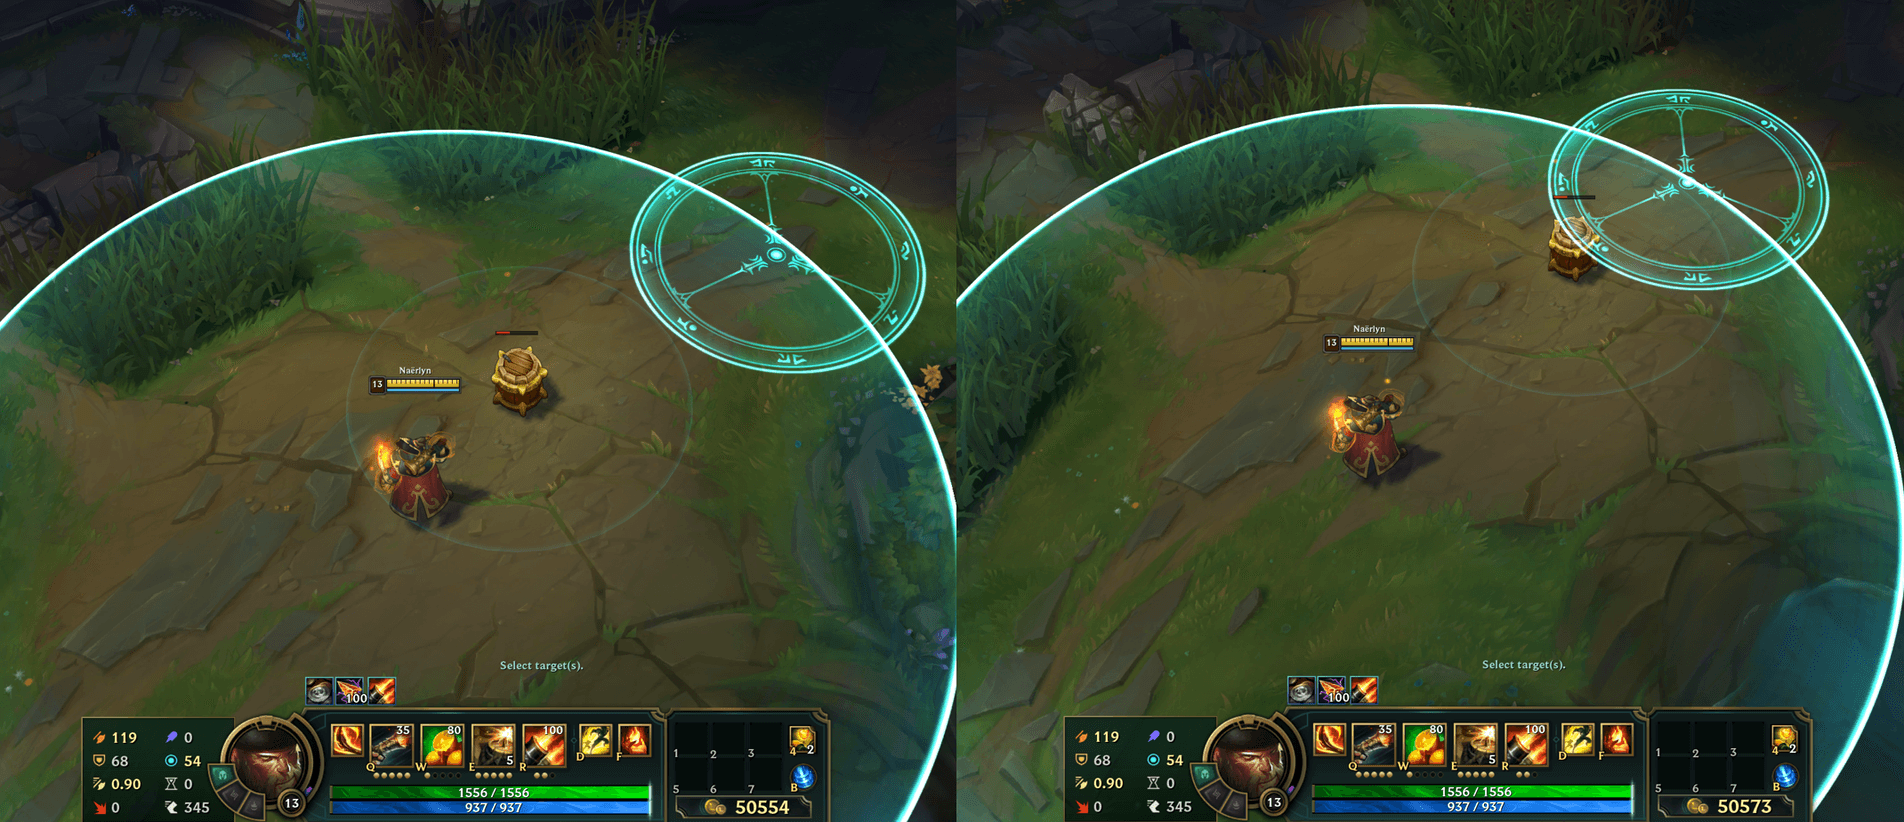 Comparing the range for different gangplank combos